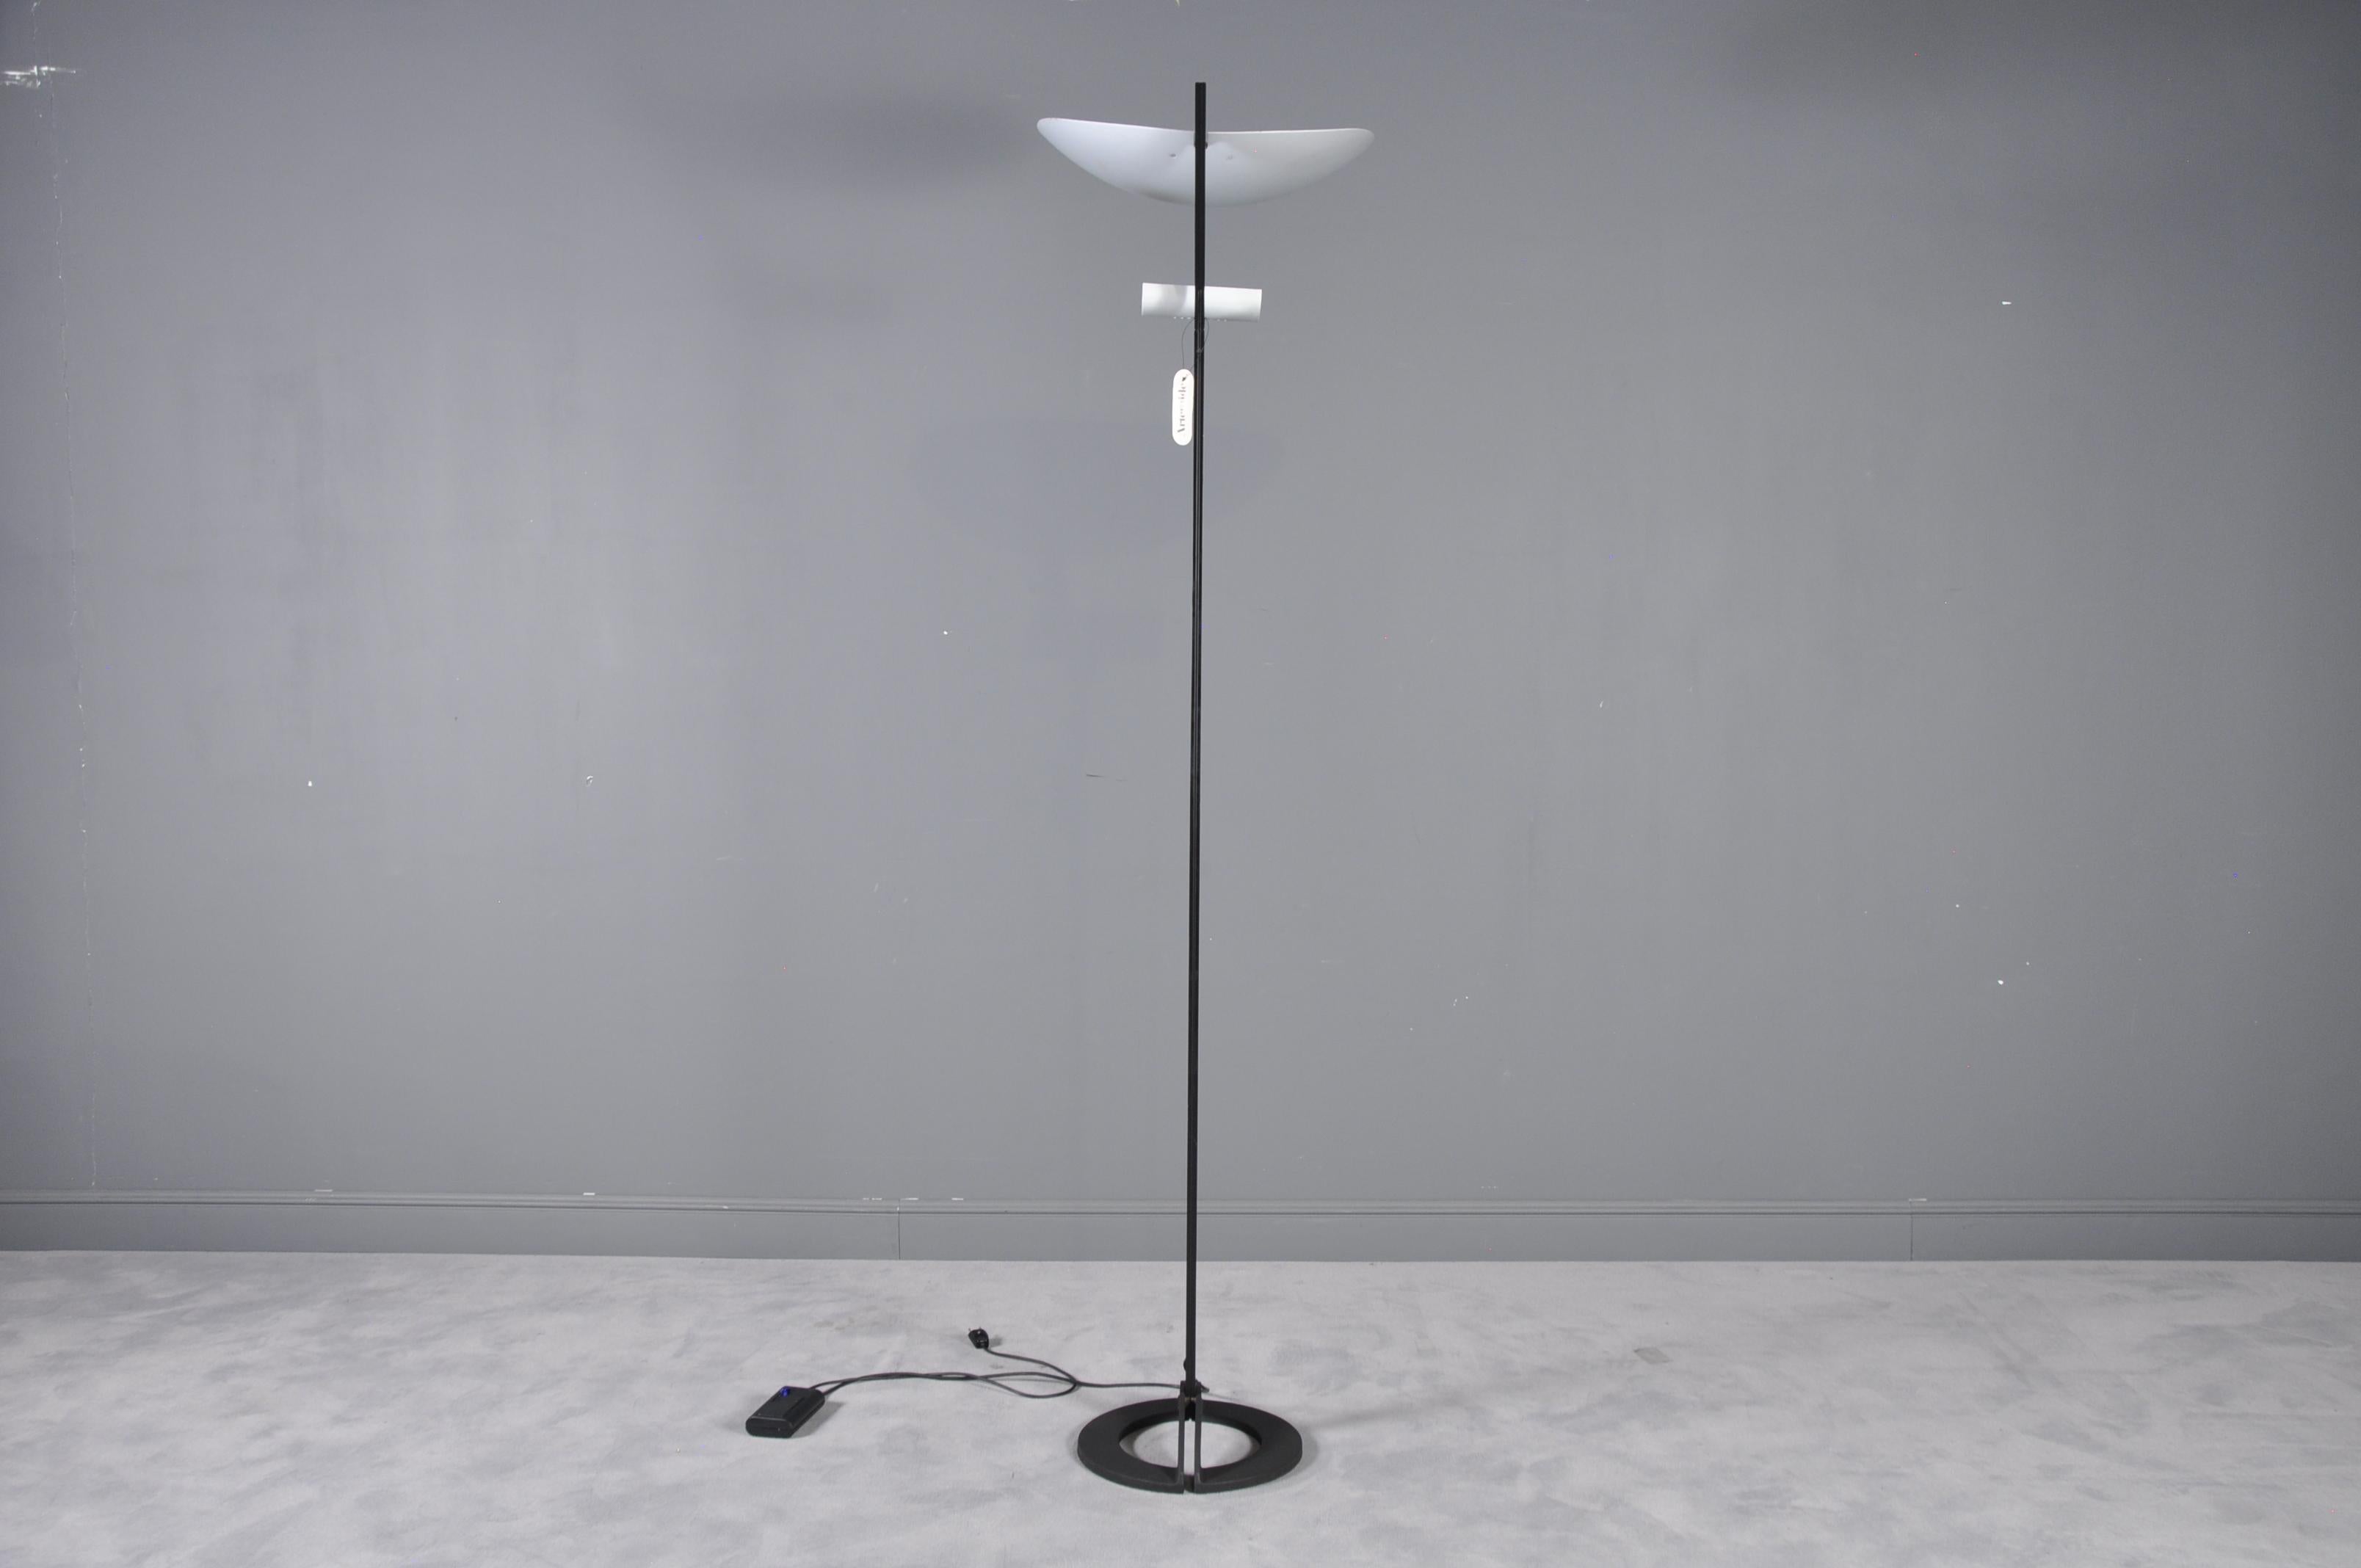 This modern halogen torchere represent the aestetical value of the Italian Minimalist aproach, sensuality and effectivness in lighting. Conceived by the founder of Artemide, Ernesto Gismondi in 1988. Made of anodized aluminium, the first shade make